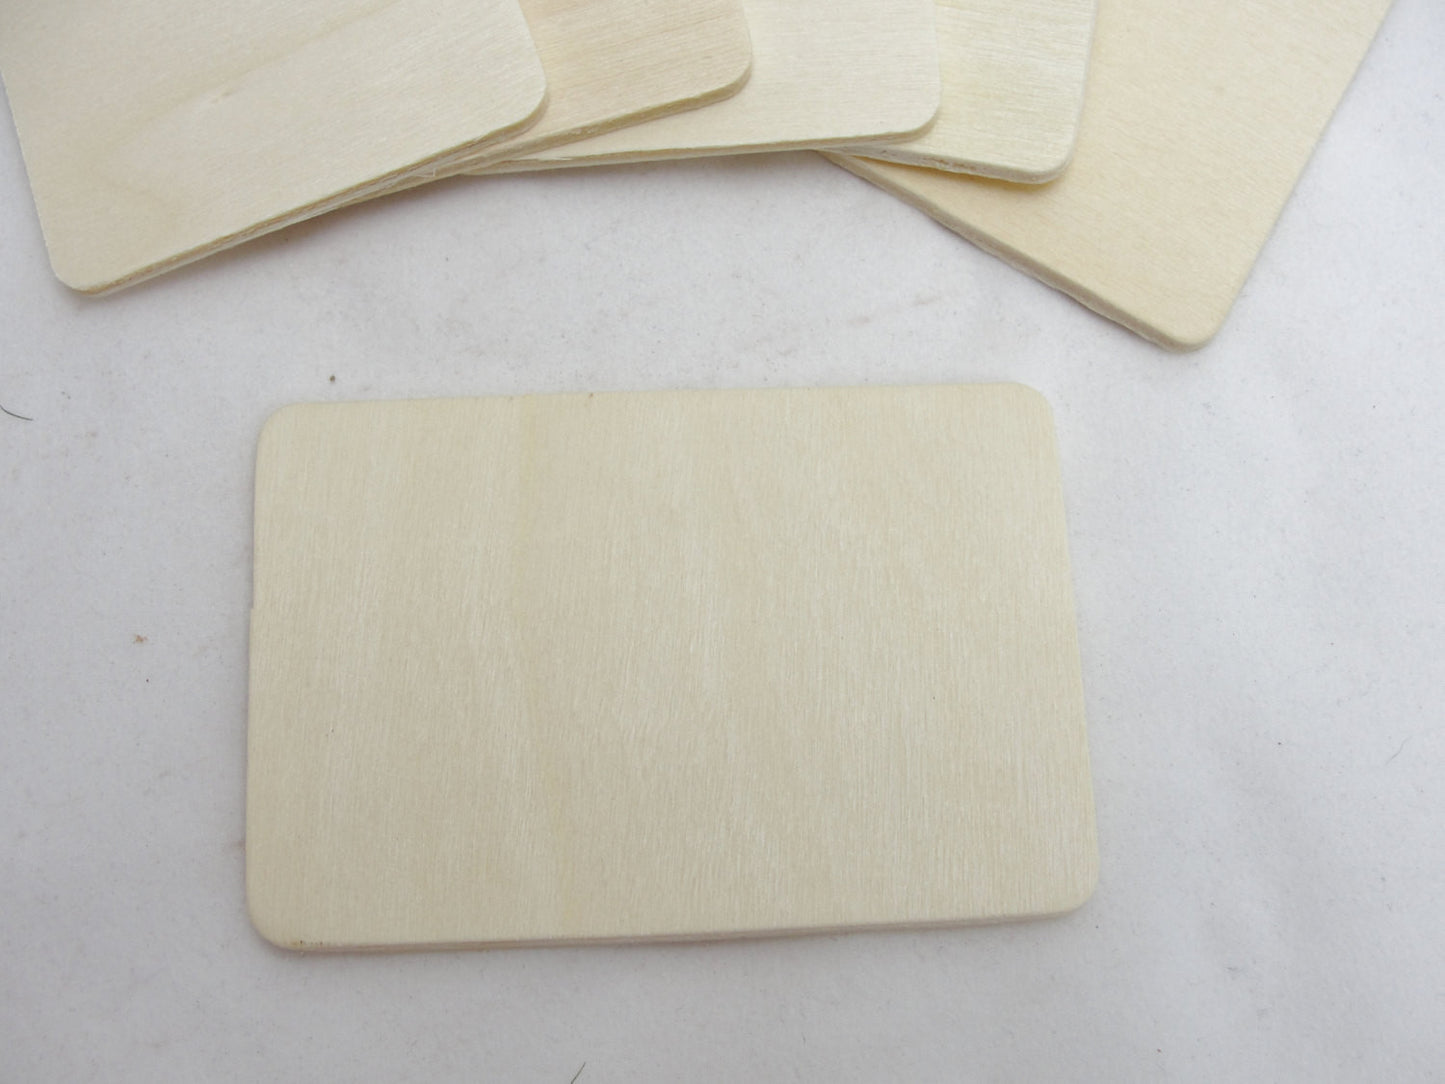 Wooden rectangles 3" x 2" set of 6 - Wood parts - Craft Supply House